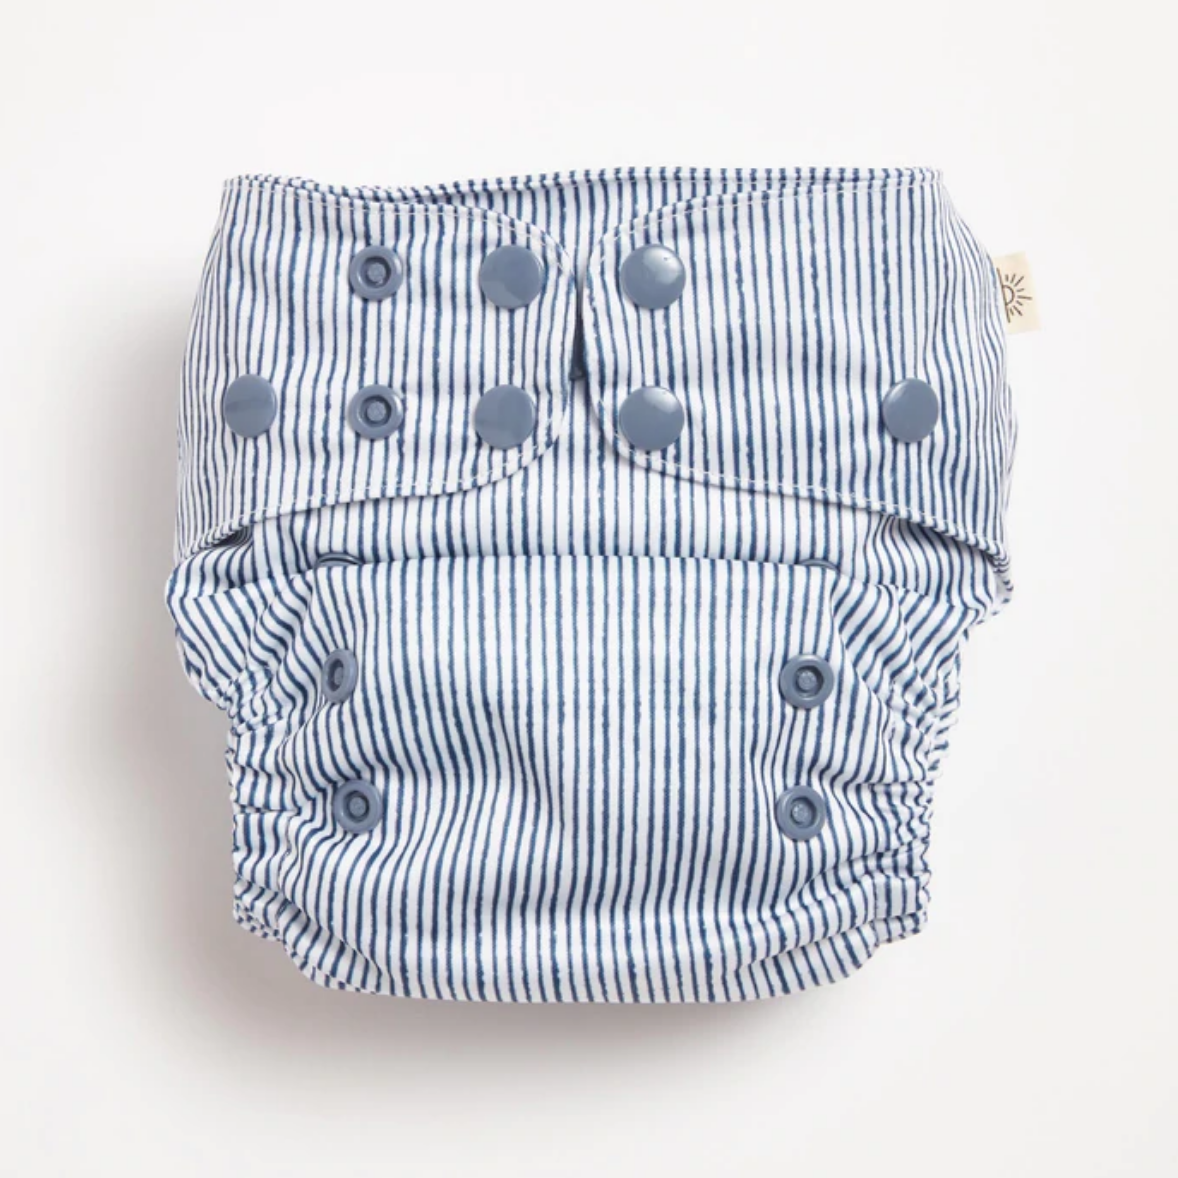 econaps reusable nappy - angus and dudley